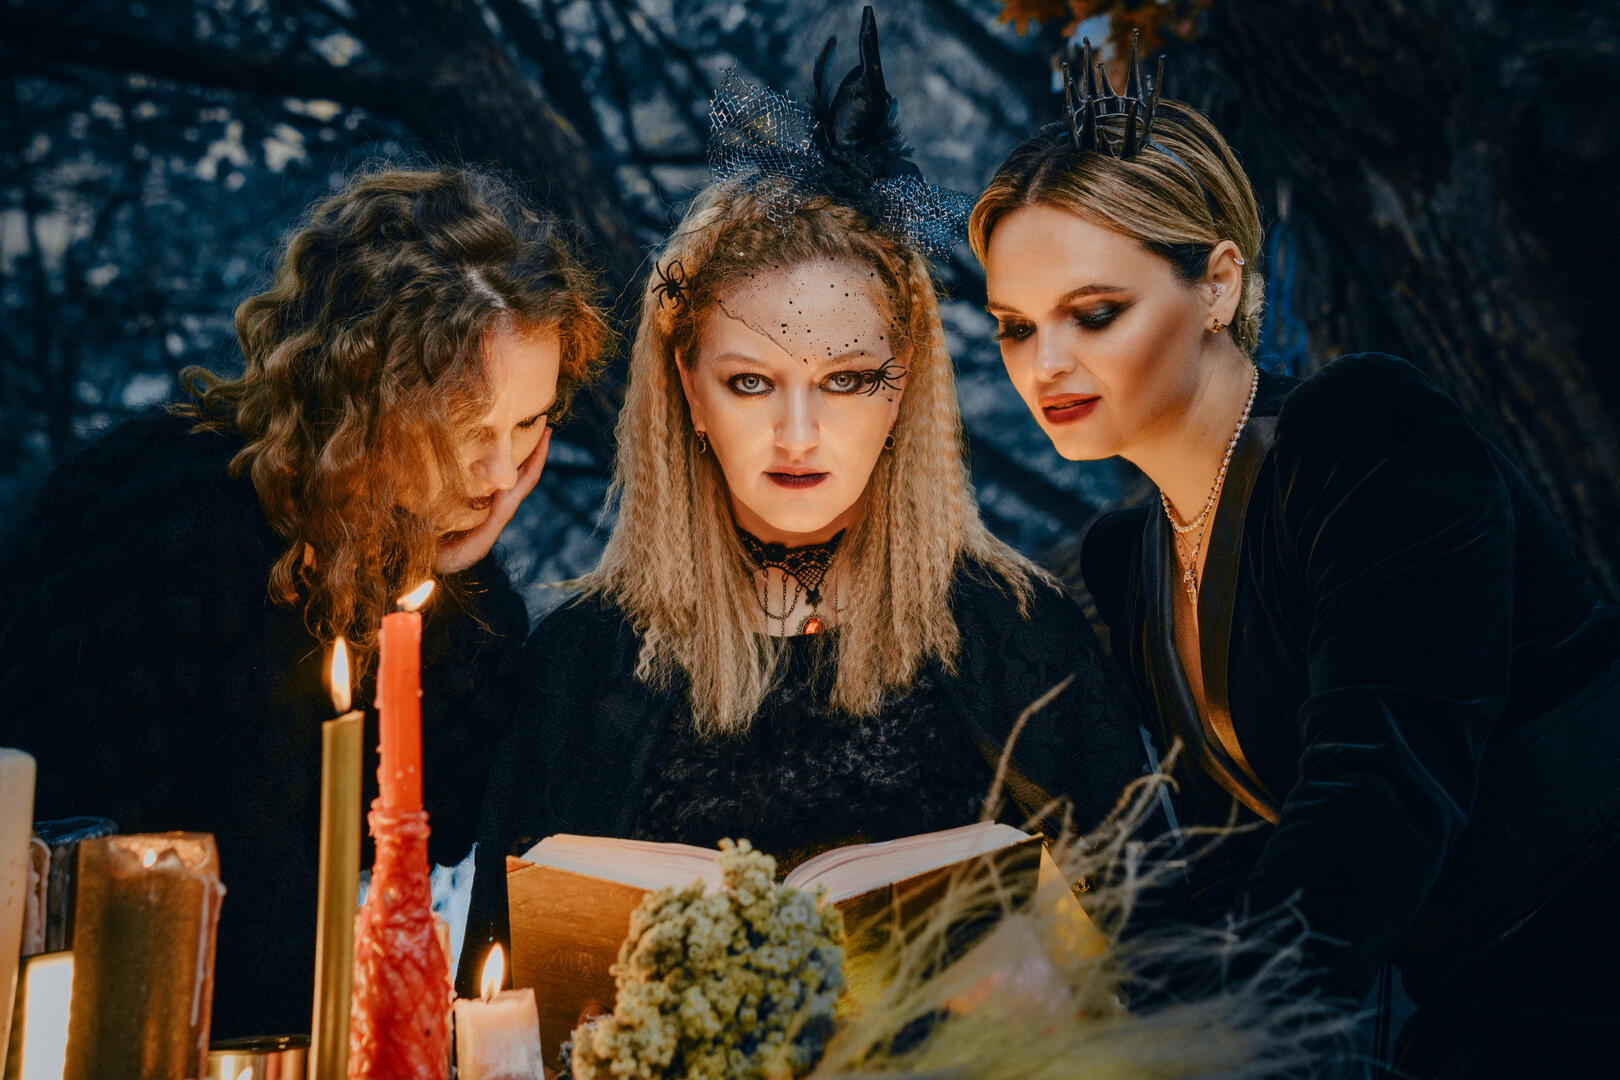 Witches - General photo contest | Photocrowd photo competitions ...